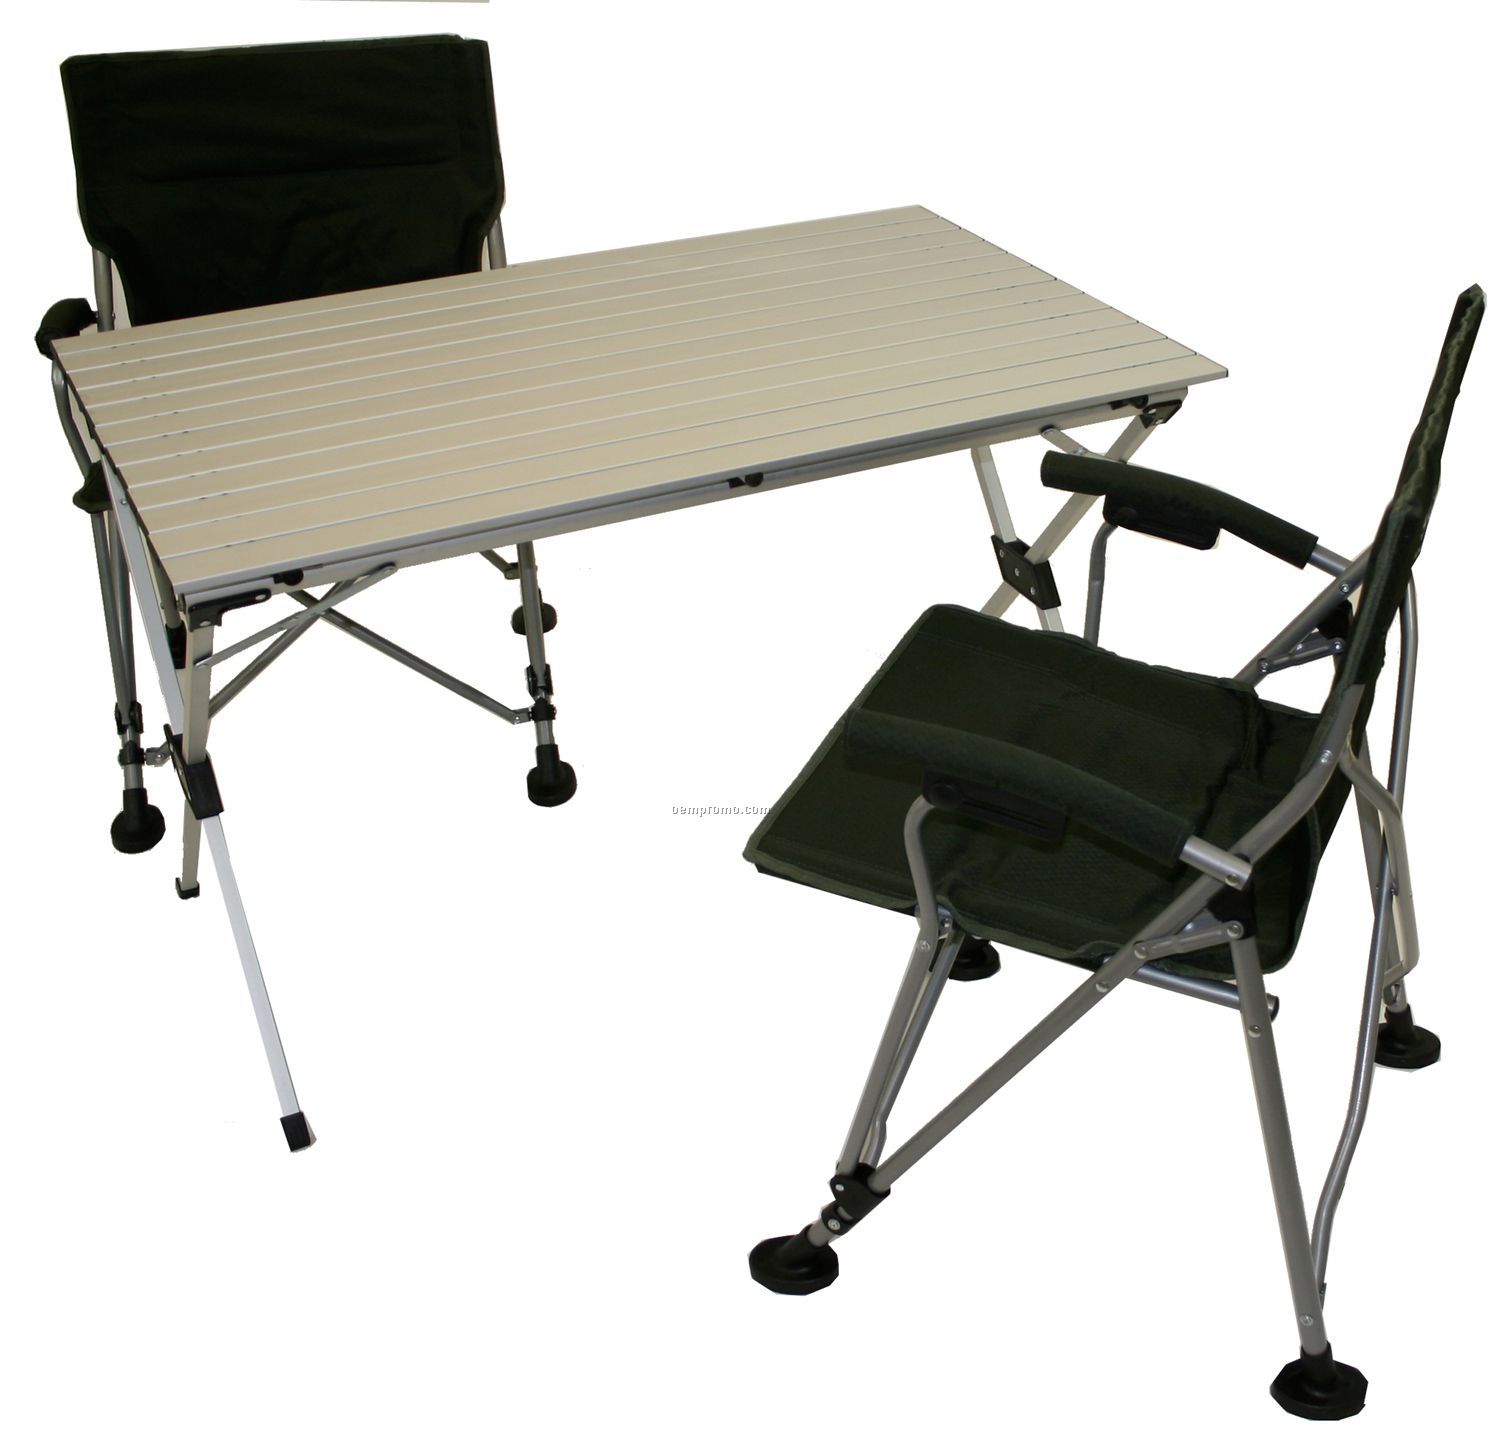 Large Picnic Aluminum Picnic Table With 2 Chairs In A Bag